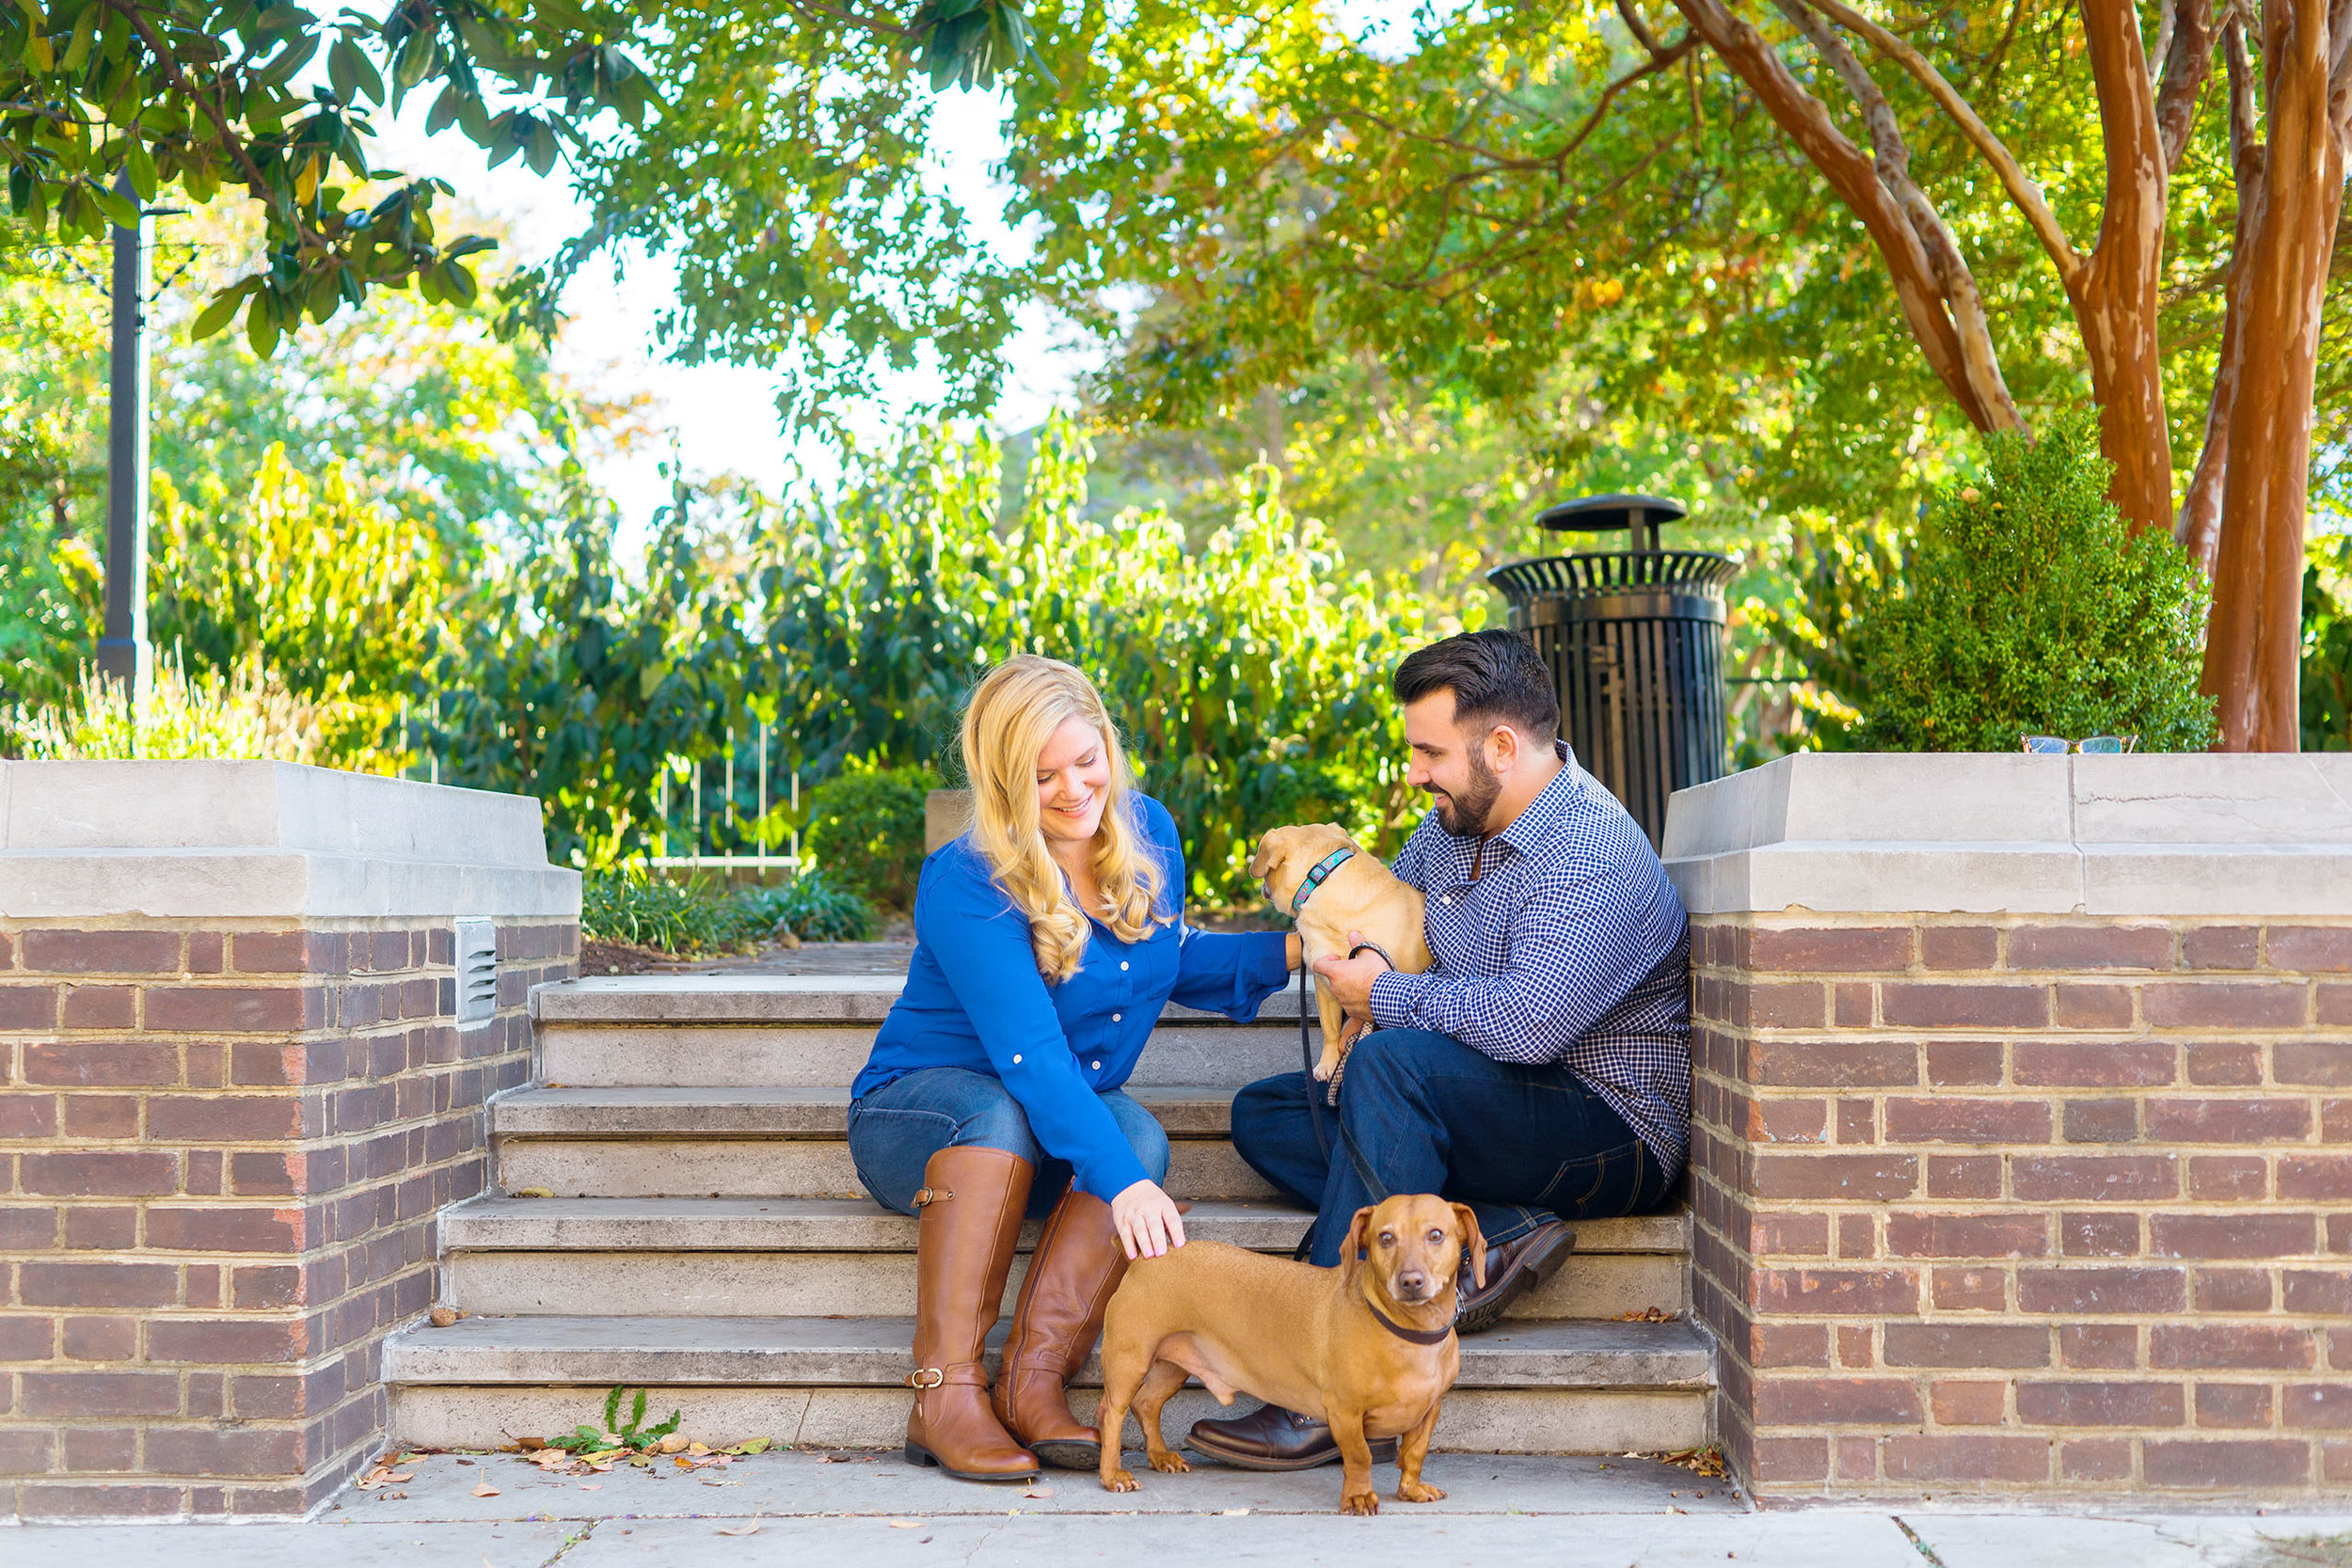 Autumn old town alexandria engagement session 